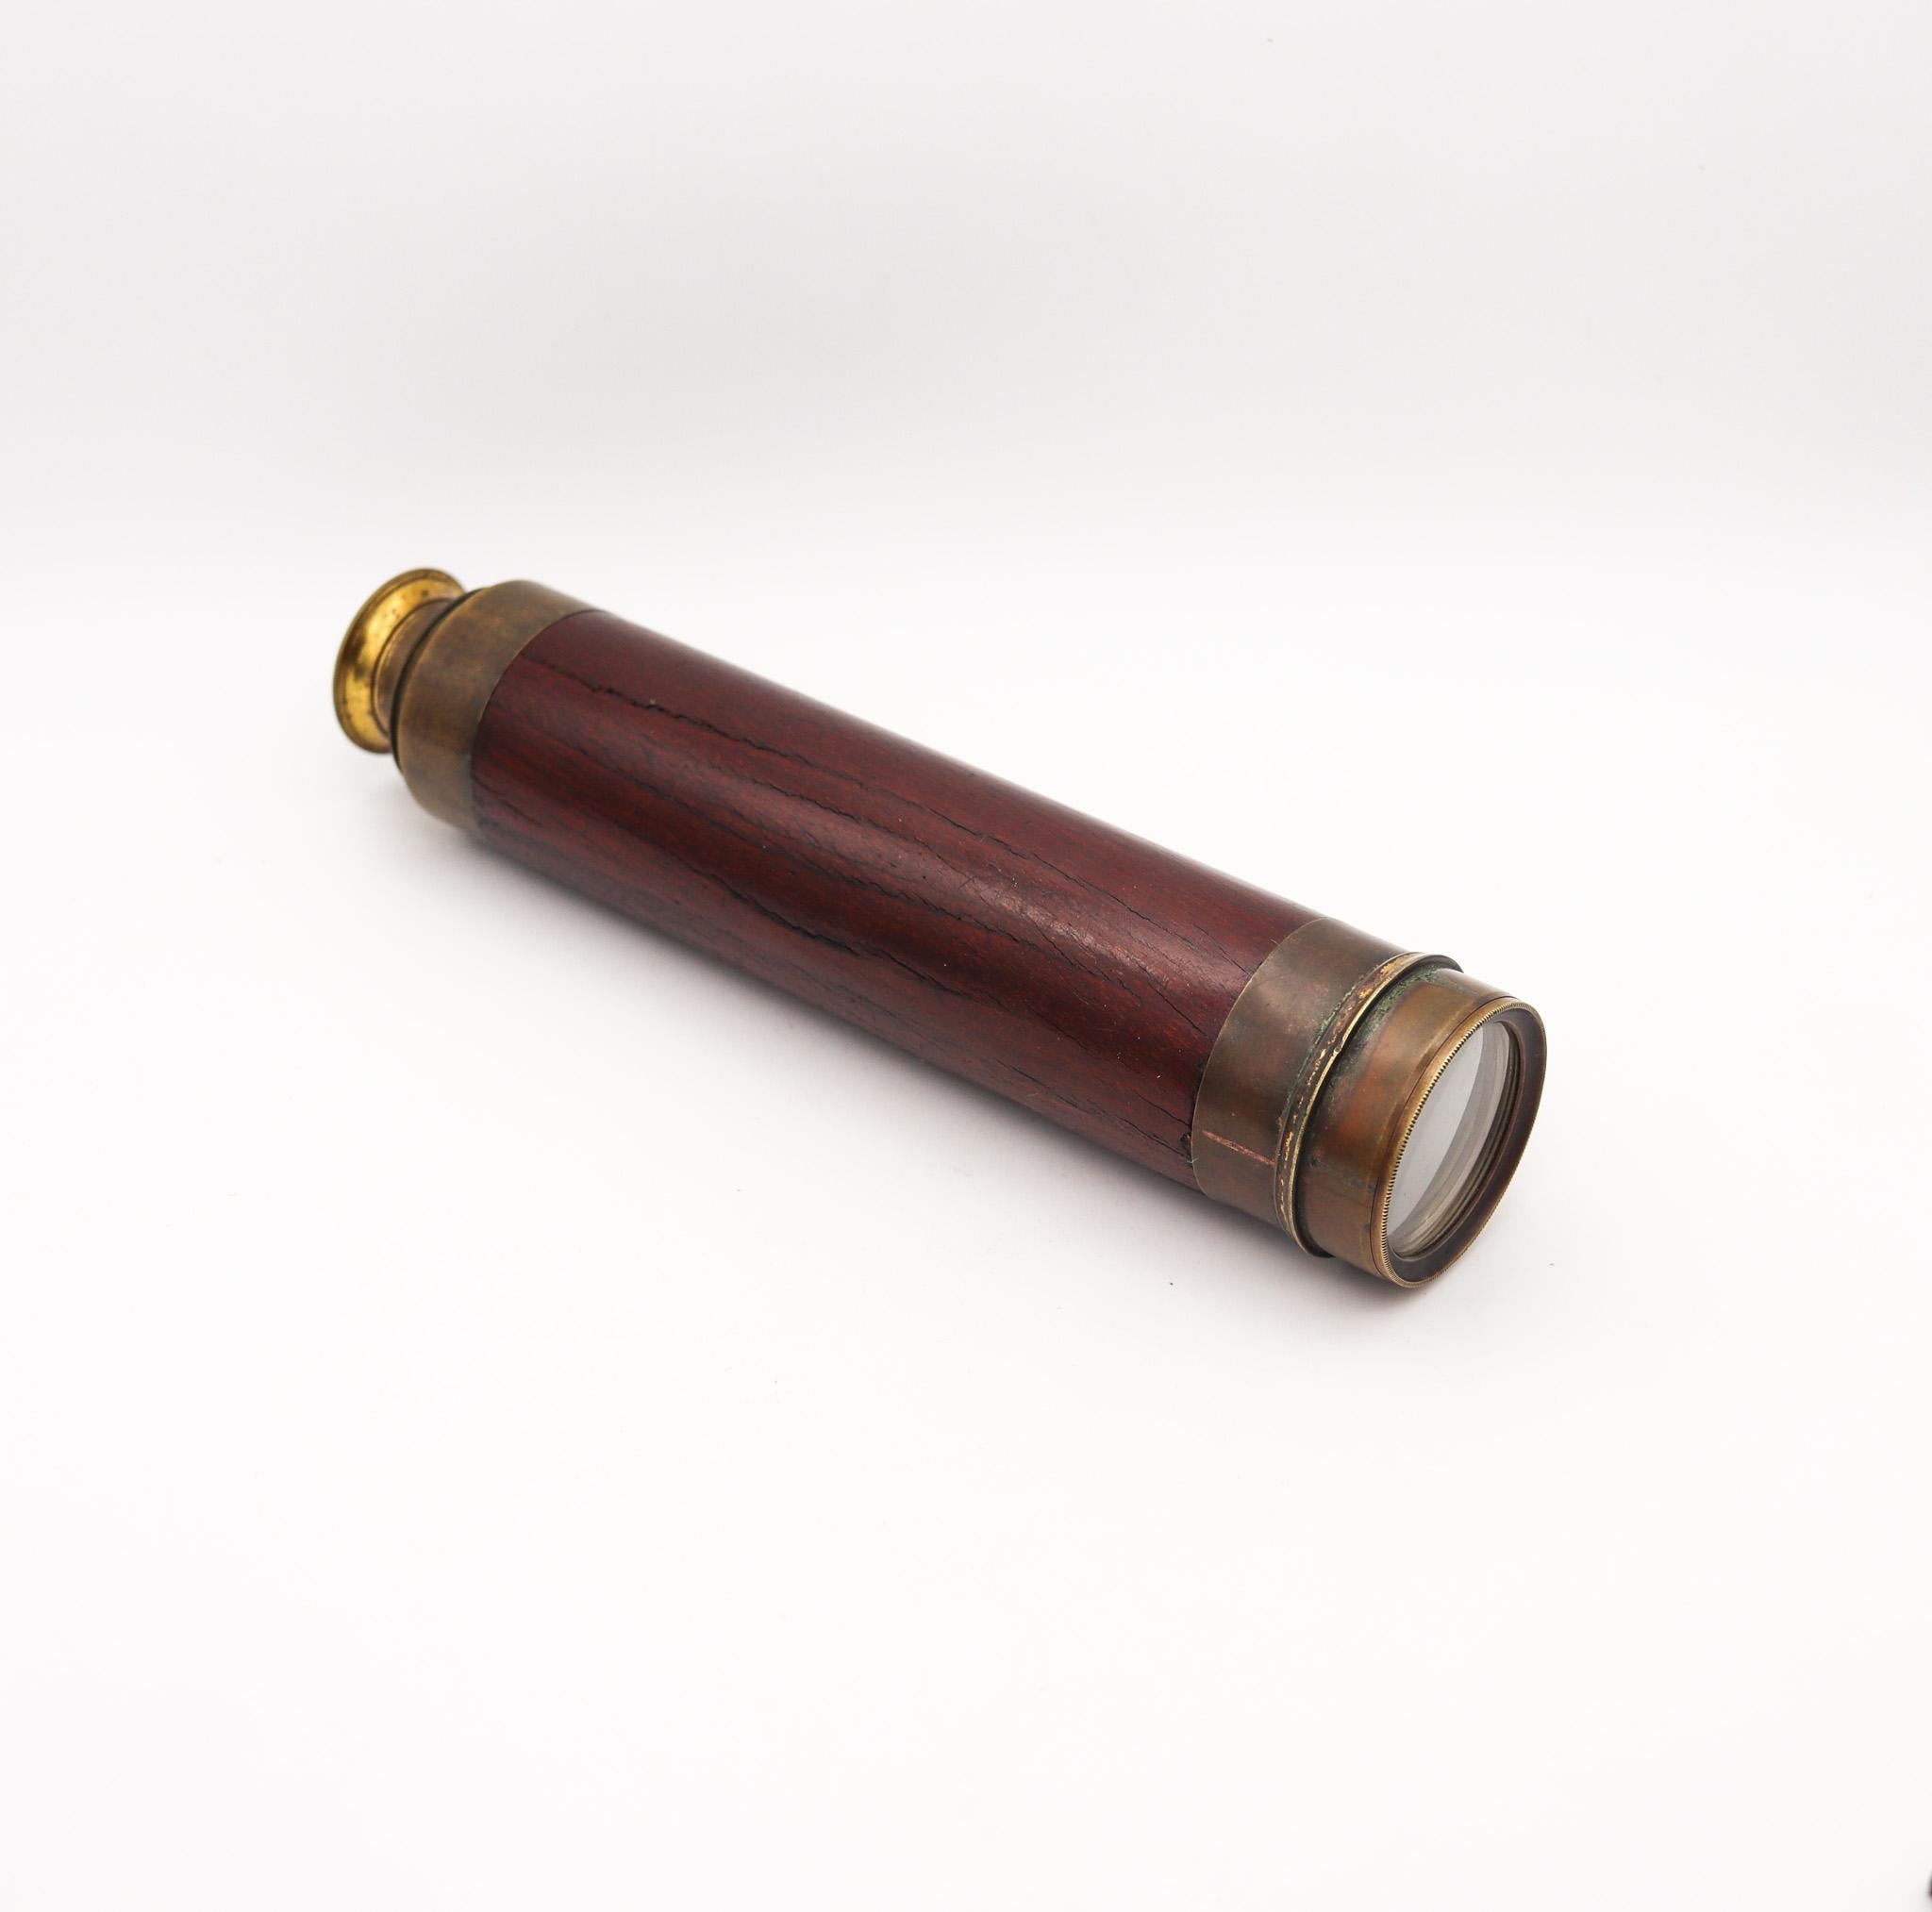 British four-Draws Monocular Telescope.

Very unusual monocular telescope, created in England during the Victorian era, in the last three-quarters of the 19th century, circa 1880. This is a British navy long monocular telescope, crafted with 4-draws